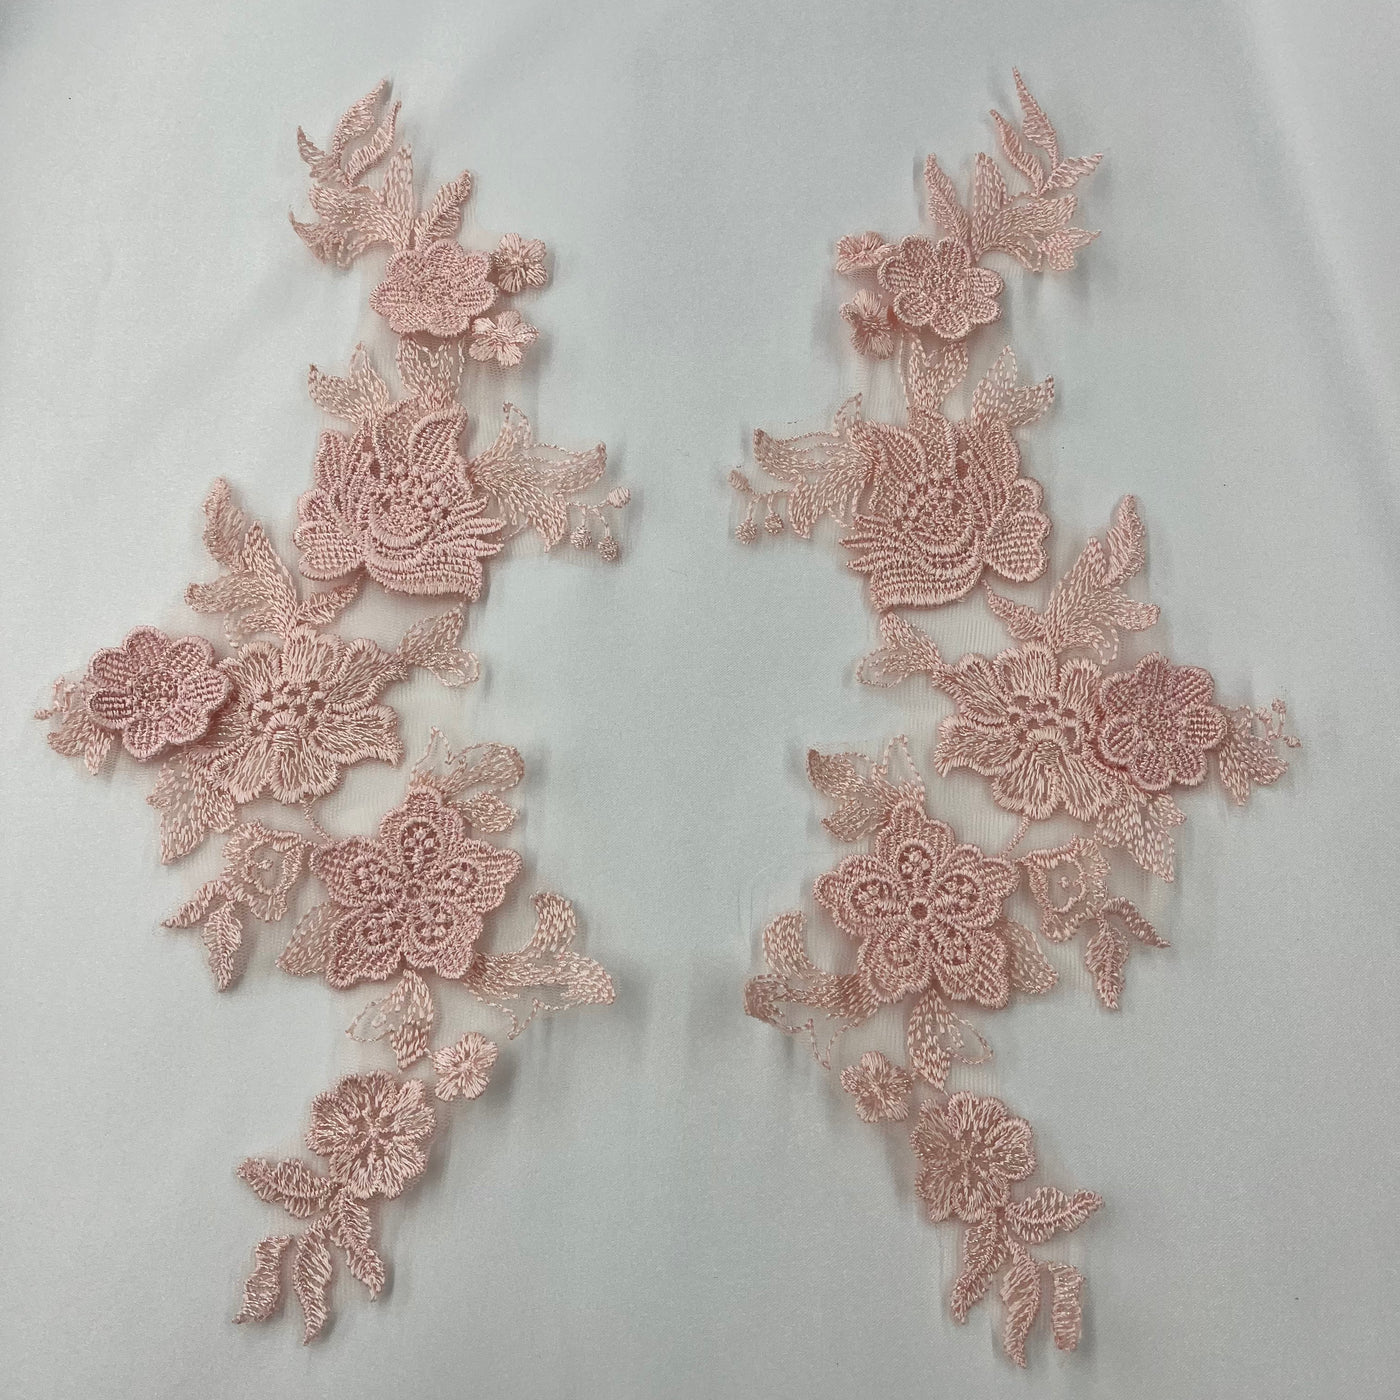 3D Floral Lace Applique Embroidered on 100% Polyester Net Mesh | Lace USA